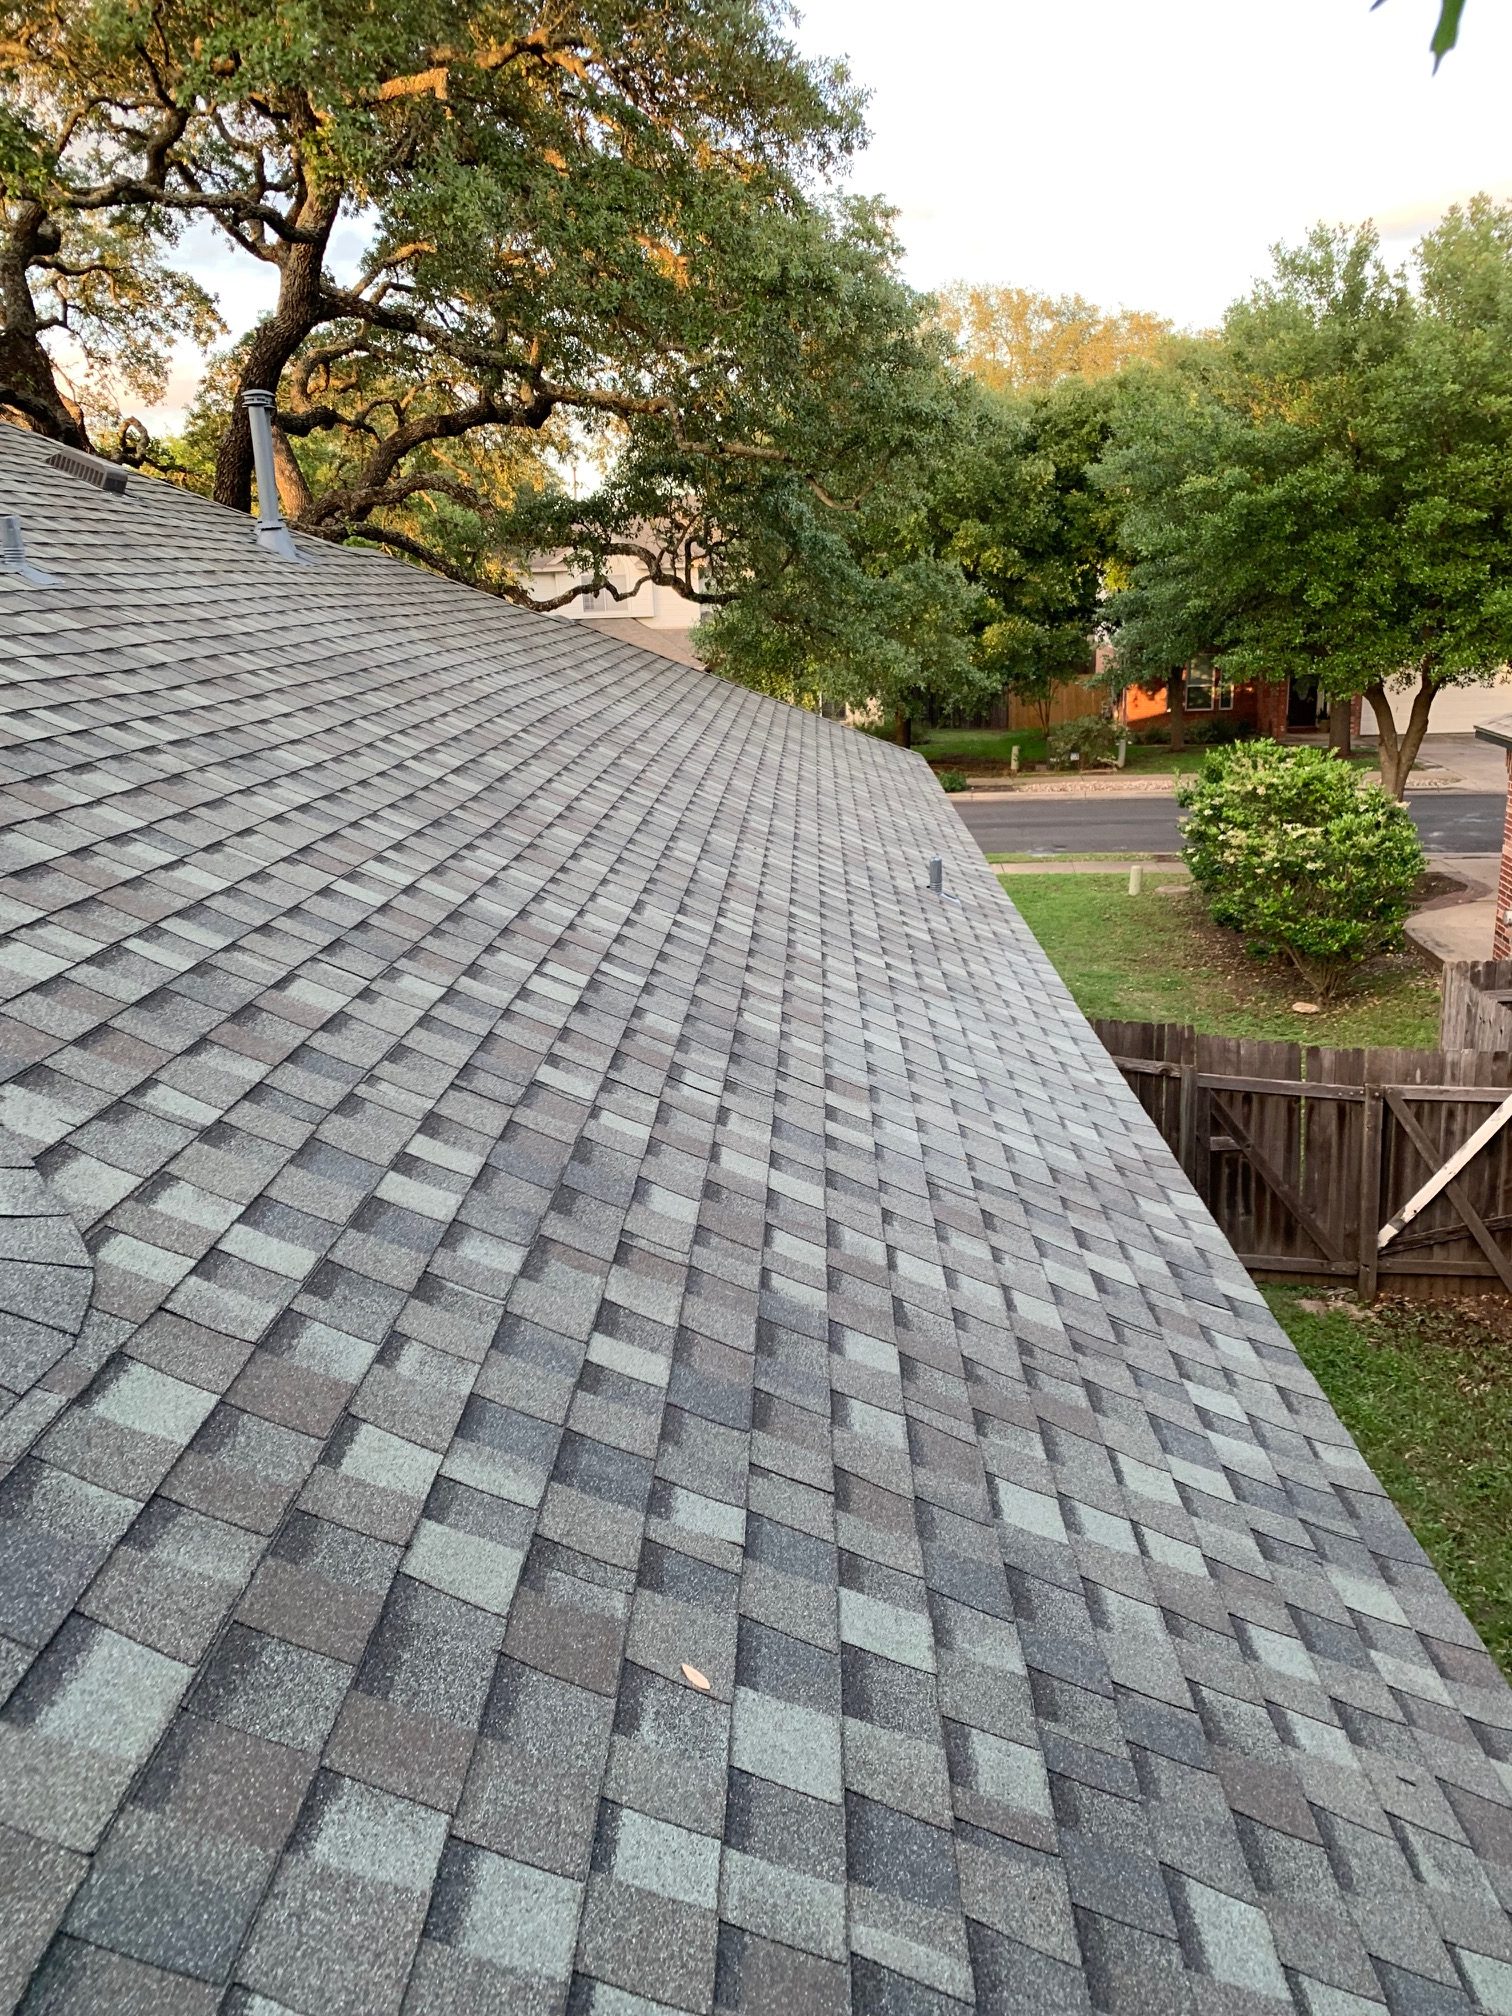 How To Pick A Shingle Color For Your Roof | Acura Roofing Inc.